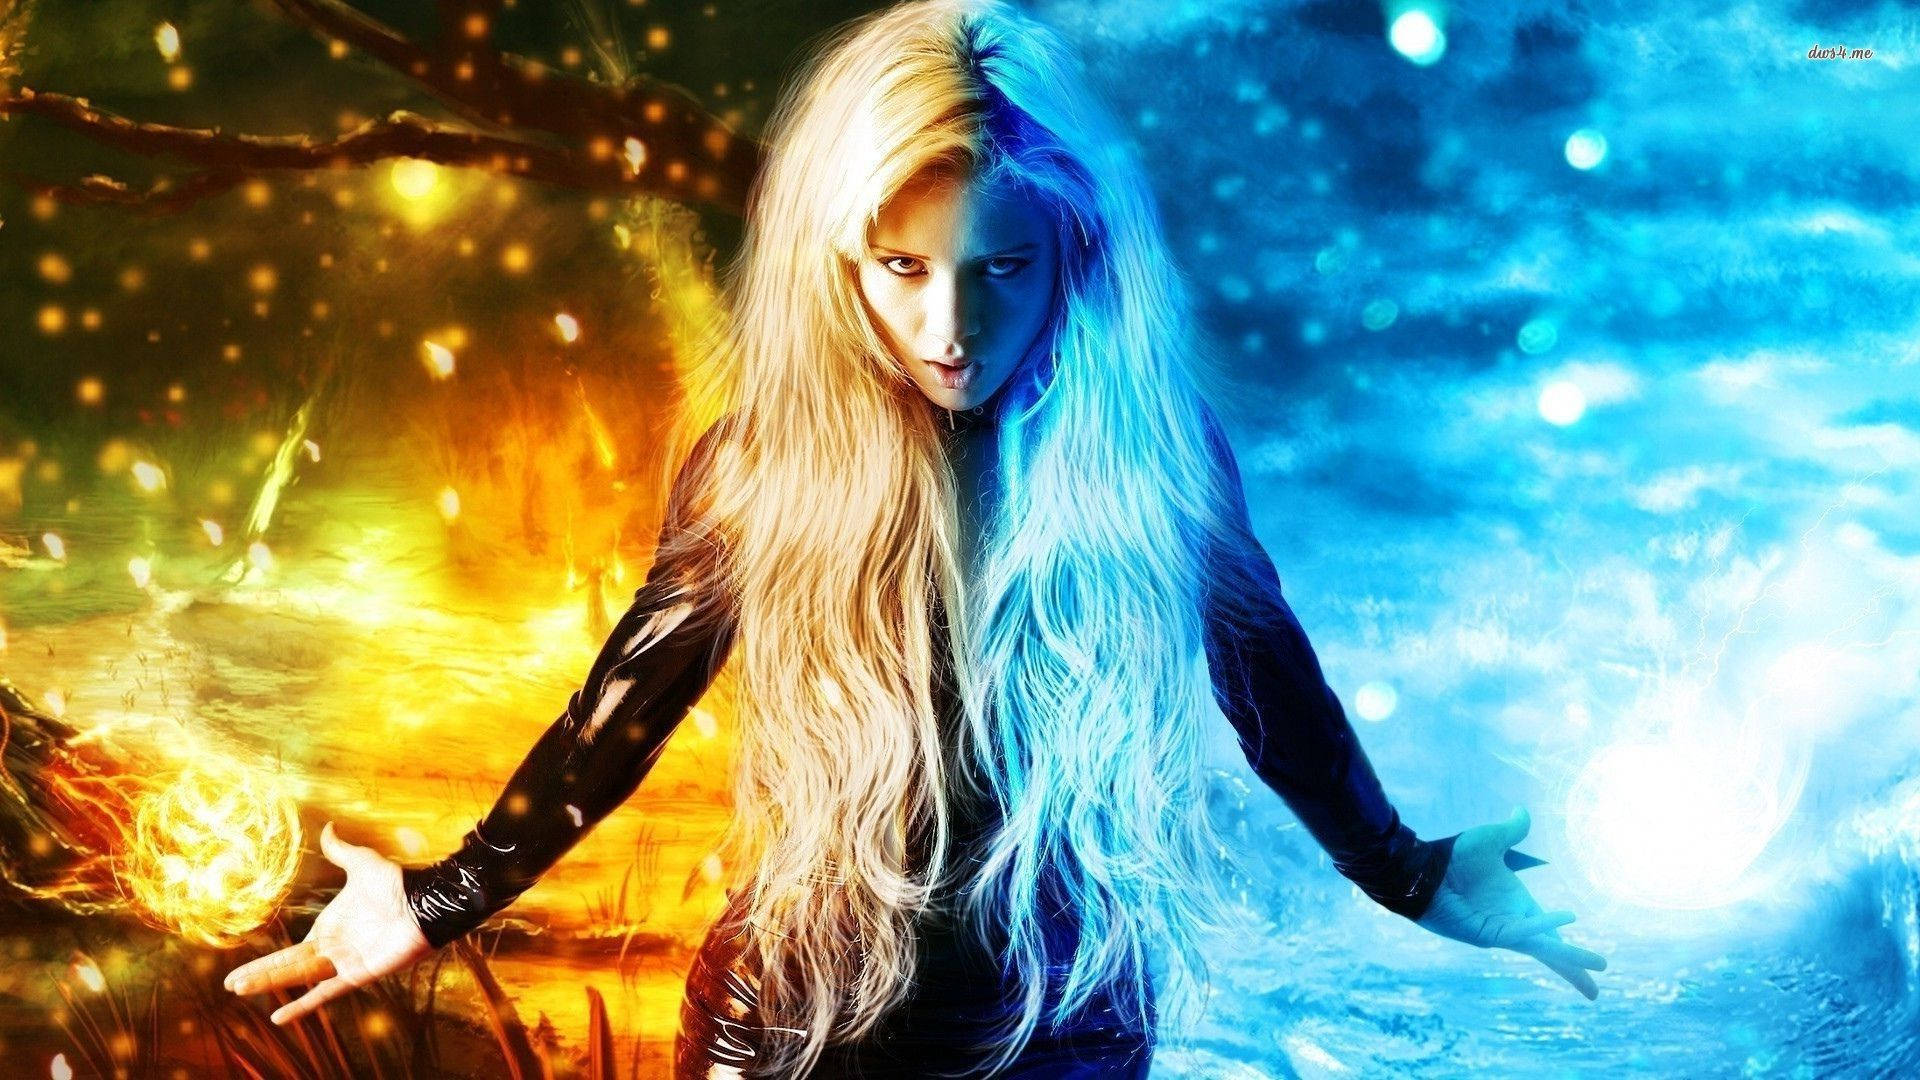 Woman Dressed In Fire And Ice Wallpaper